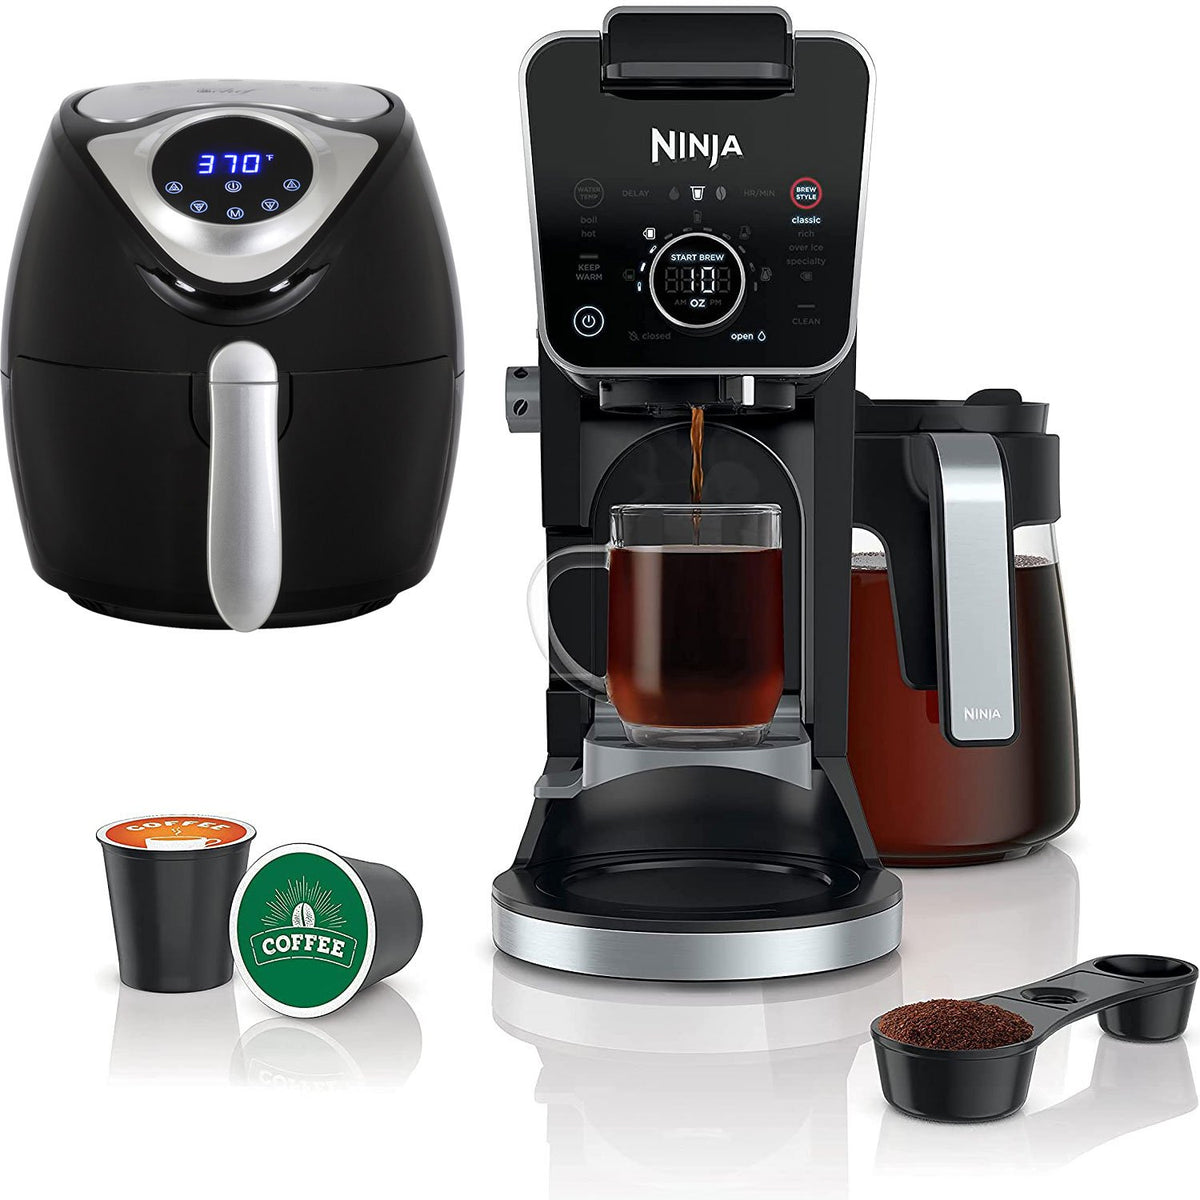 Review: Ninja Specialty Coffee Maker brings cafe-quality home